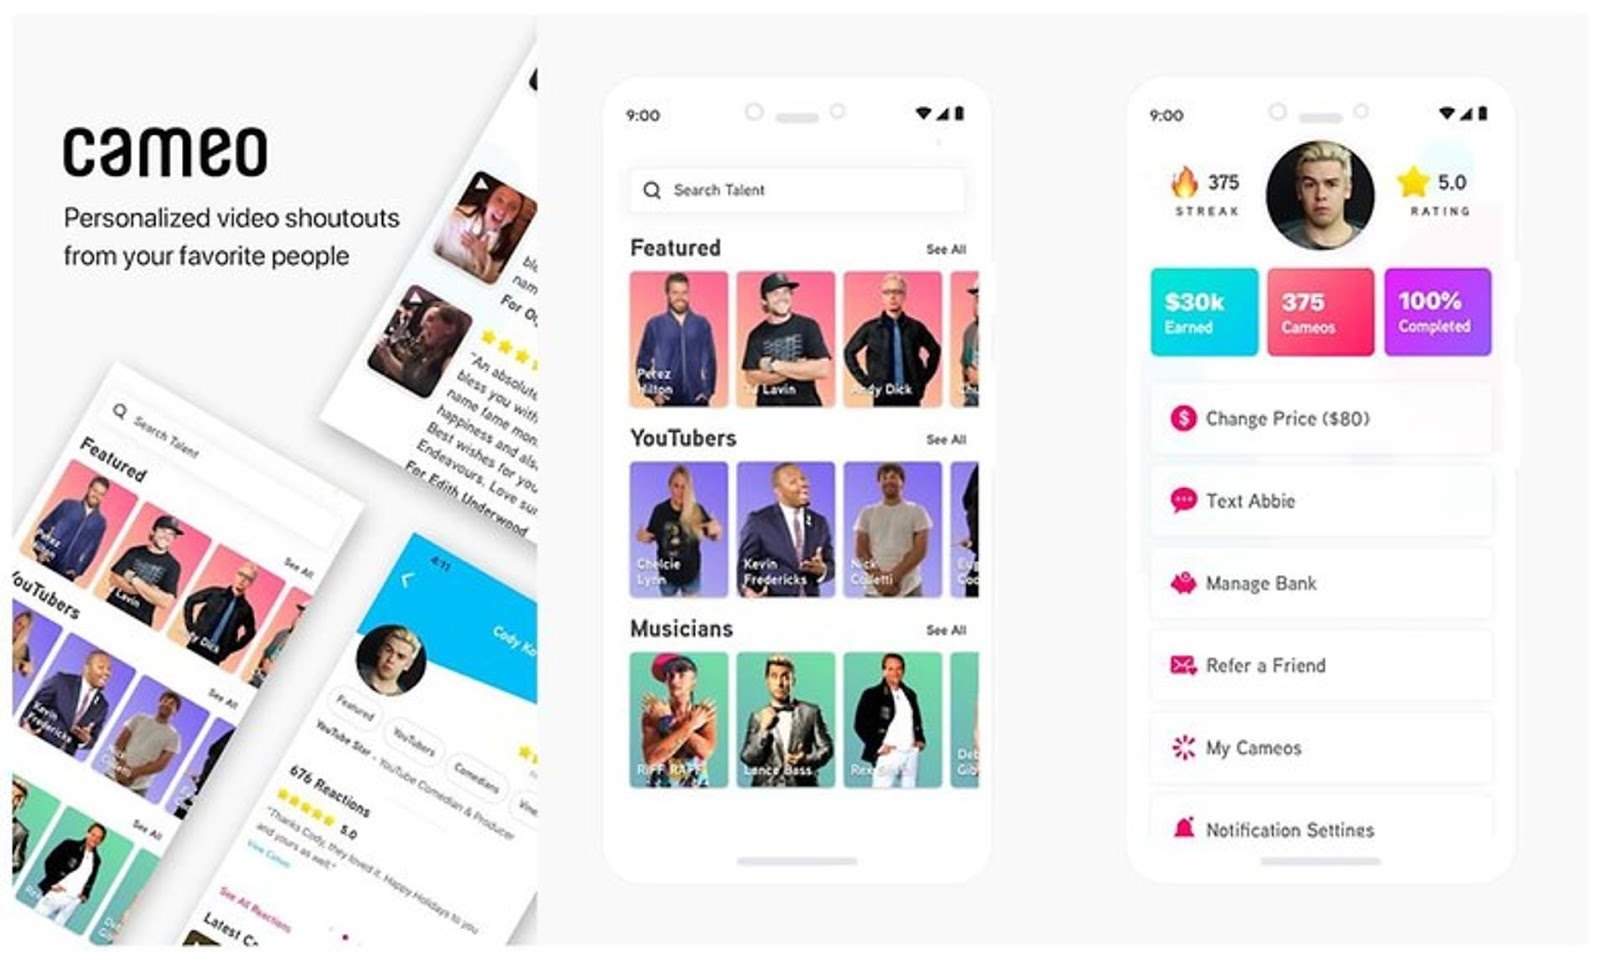 Get Personal Messages from Celebrities with the Cameo App